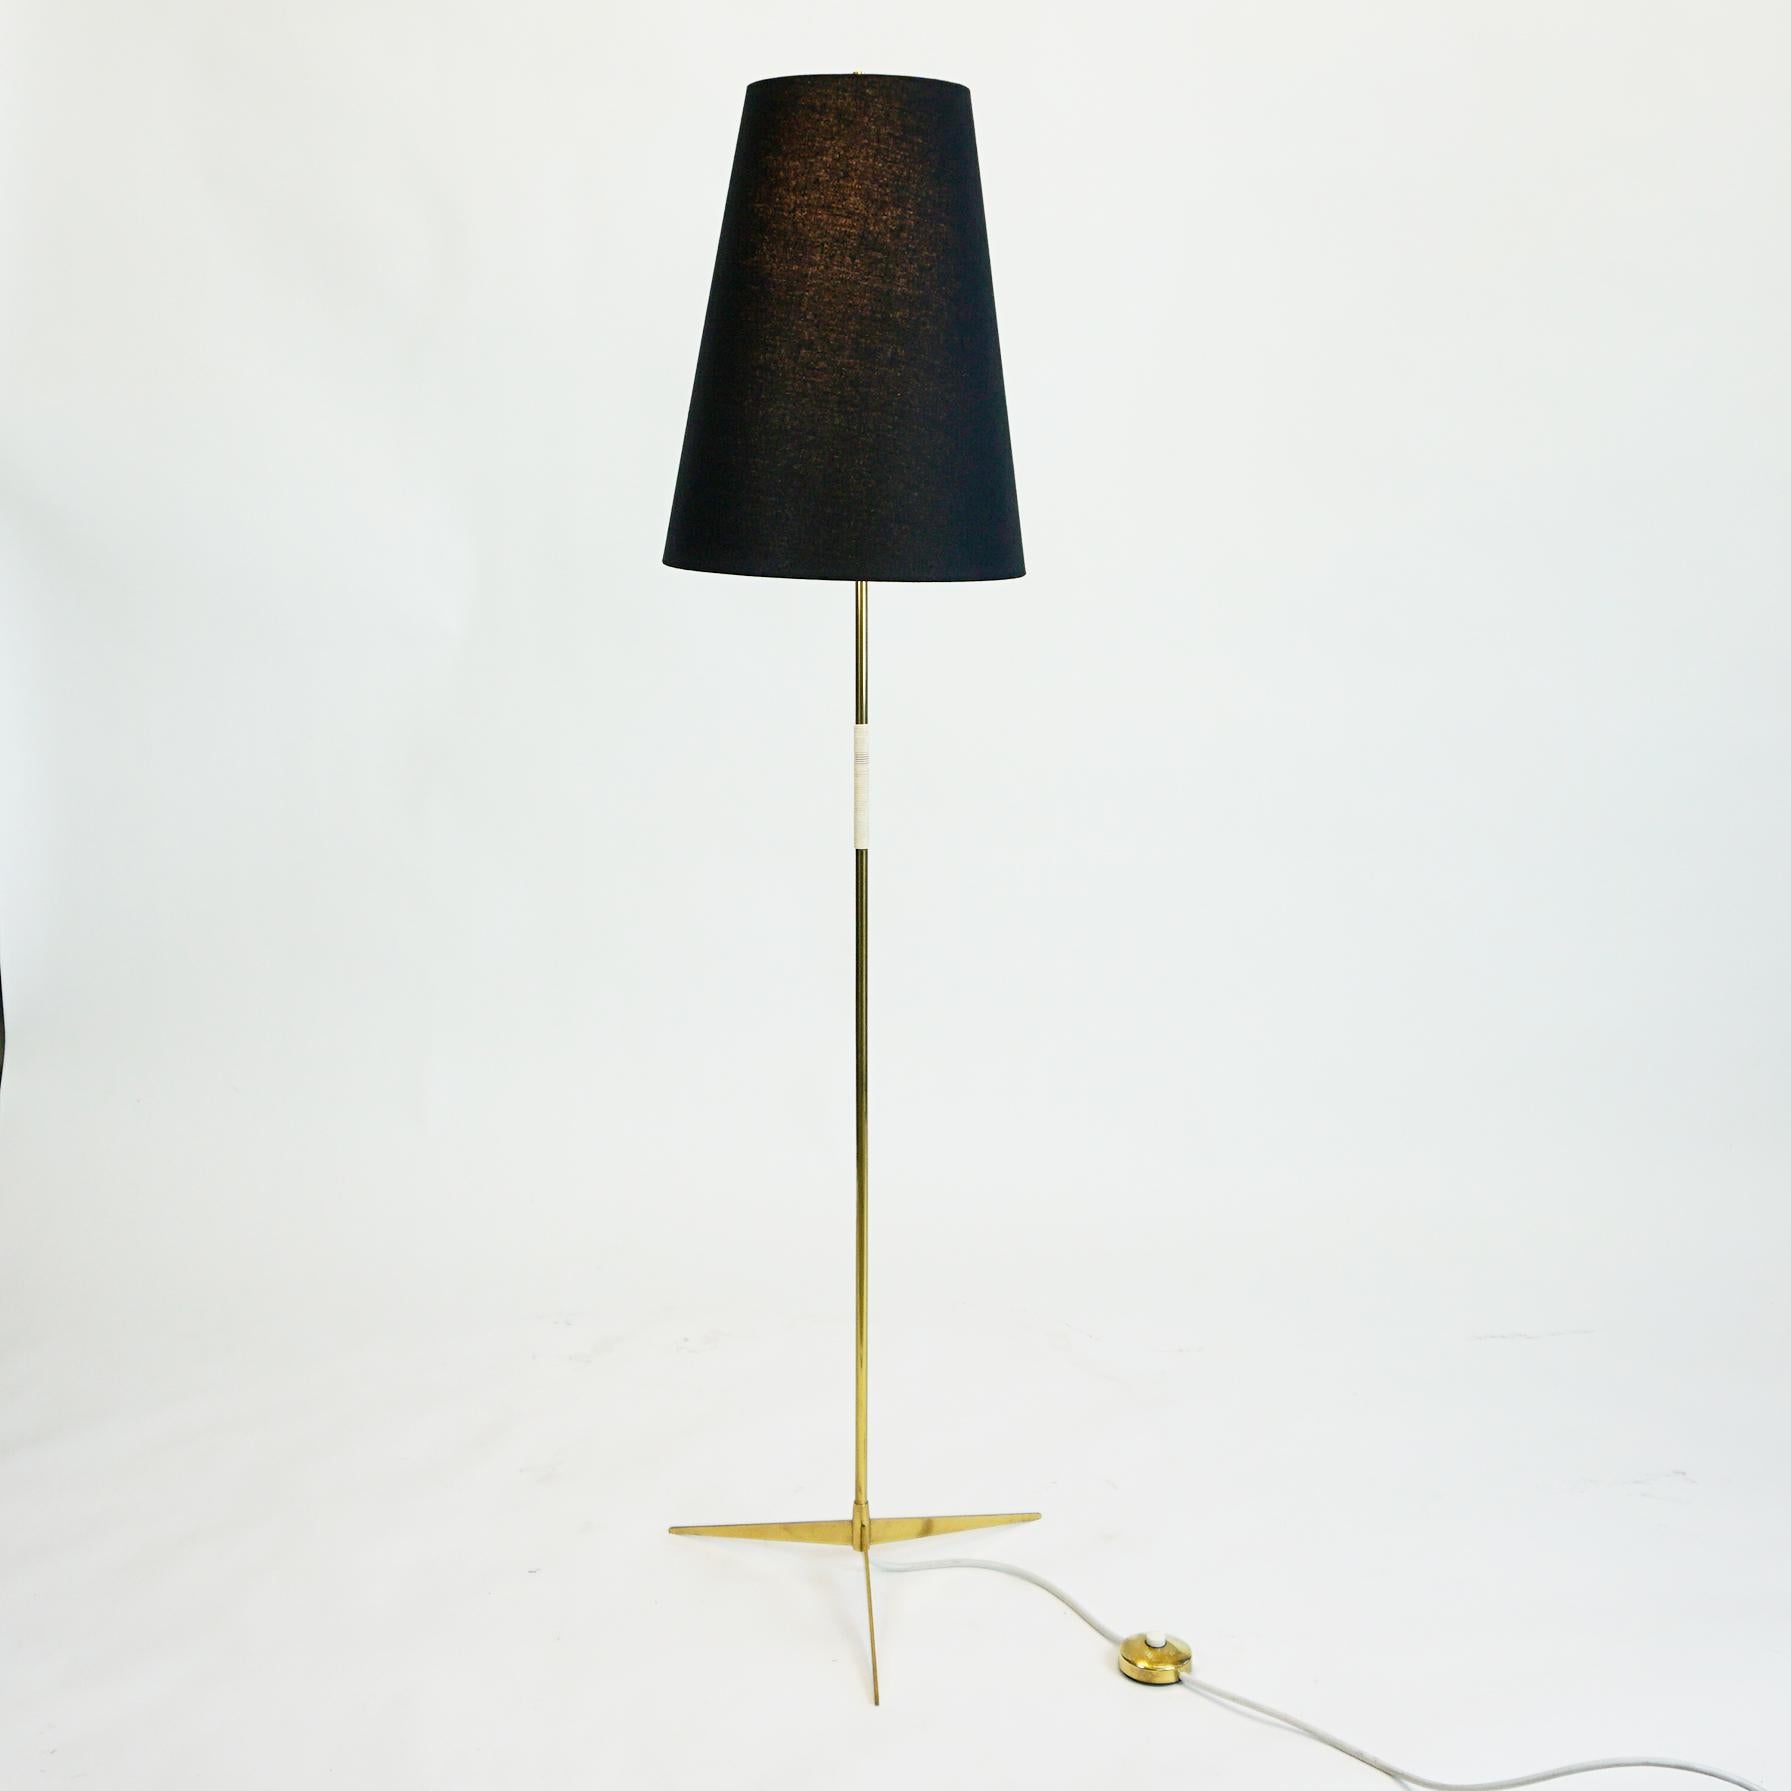 Iconic Austrian midcentury brass floor lamp called Micheline, designed by Julius Theodor Kalmar for Kalmar, Mod. No 2092 as shown in the Kalmar Sales catalogue 1960, manufactured in Austria, circa 1955. This lamp is a rare version completely in